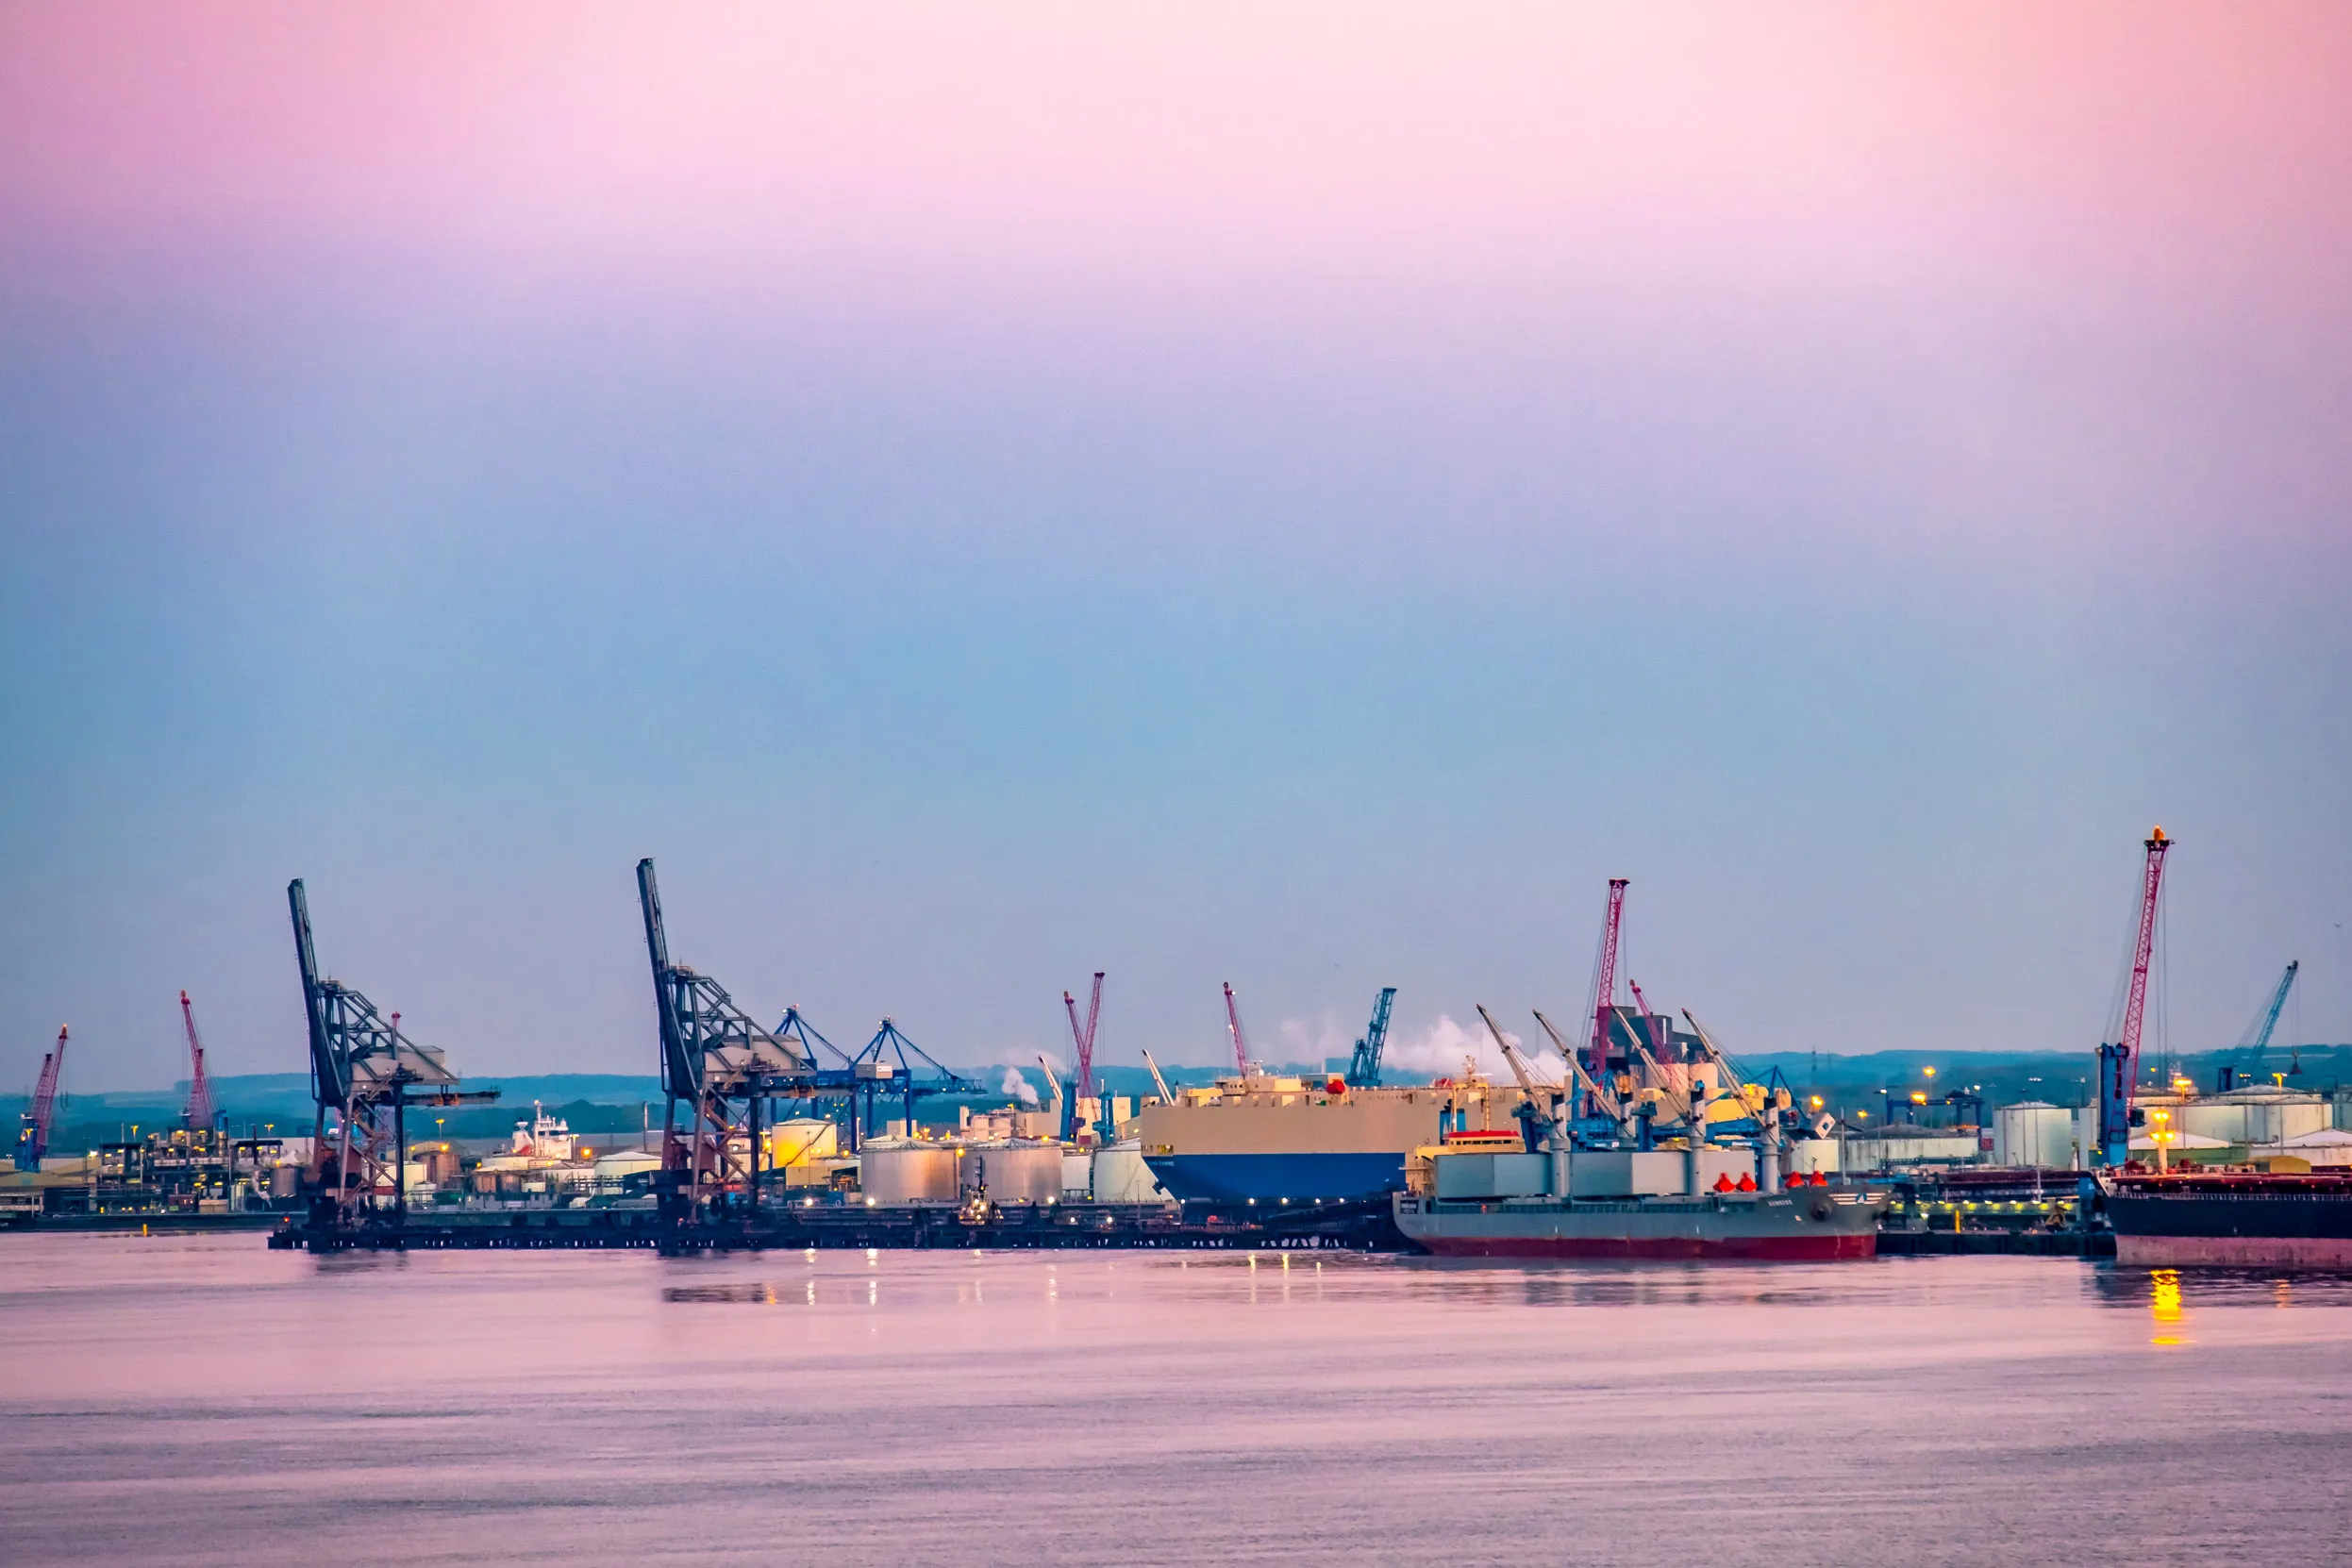 A large dock with a skyline scattered with cranes and lights.